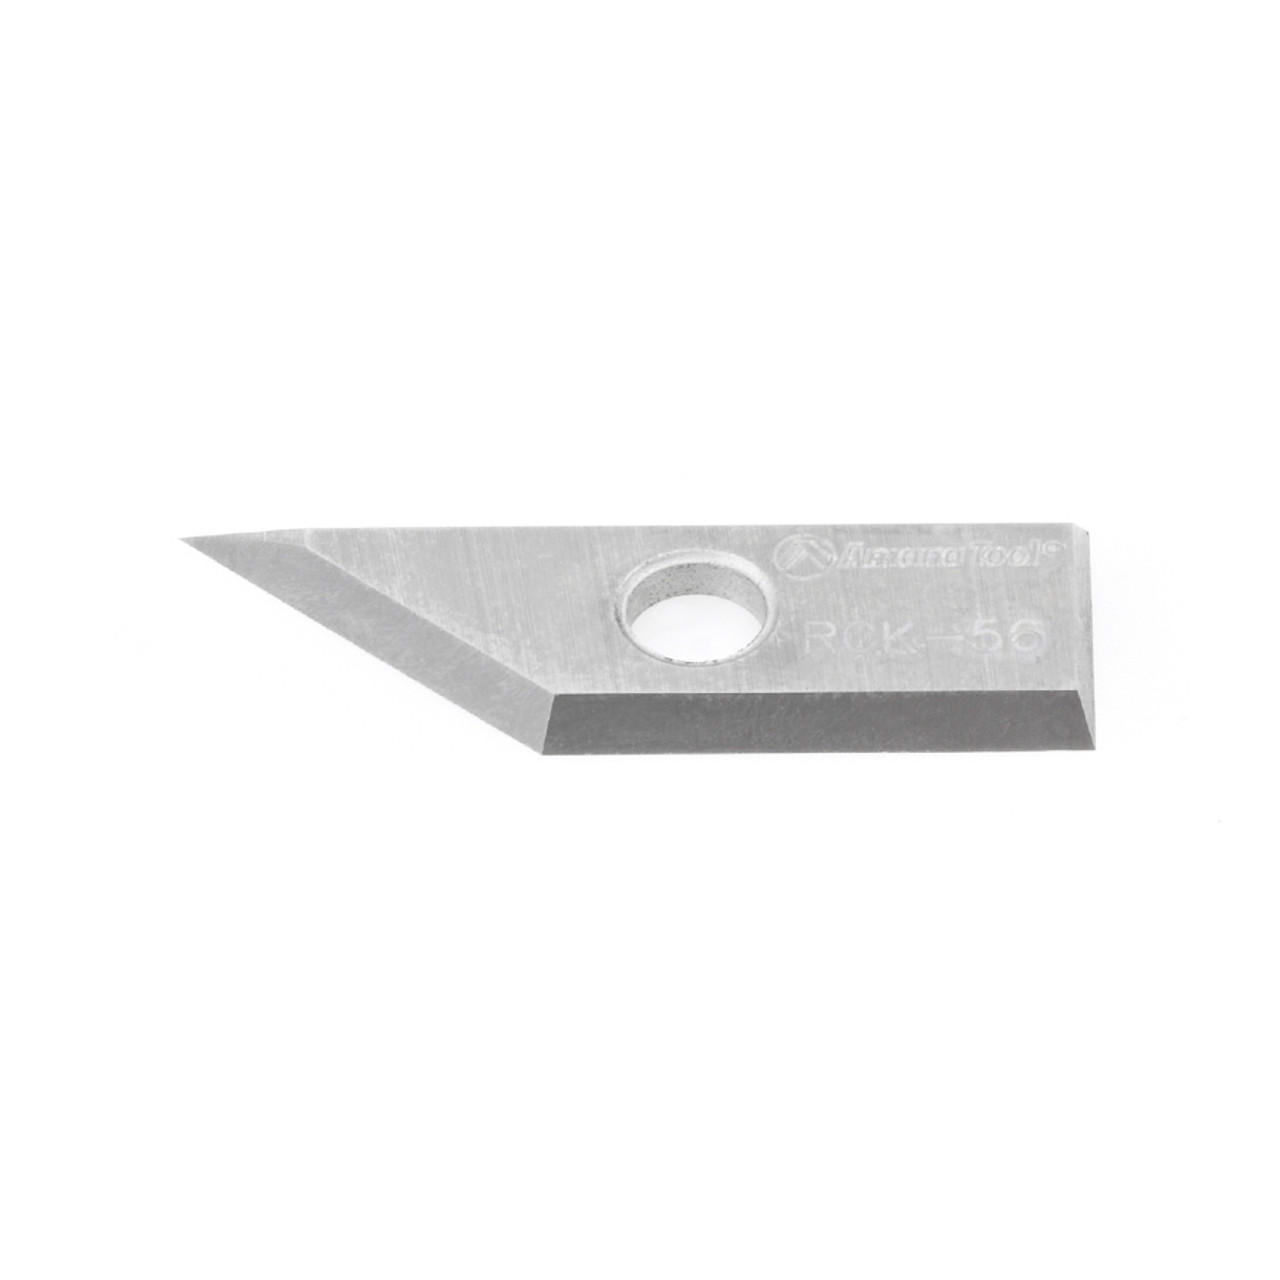 CNC Insert Finger Joint Knives - Solid Carbide, Industrial Quality